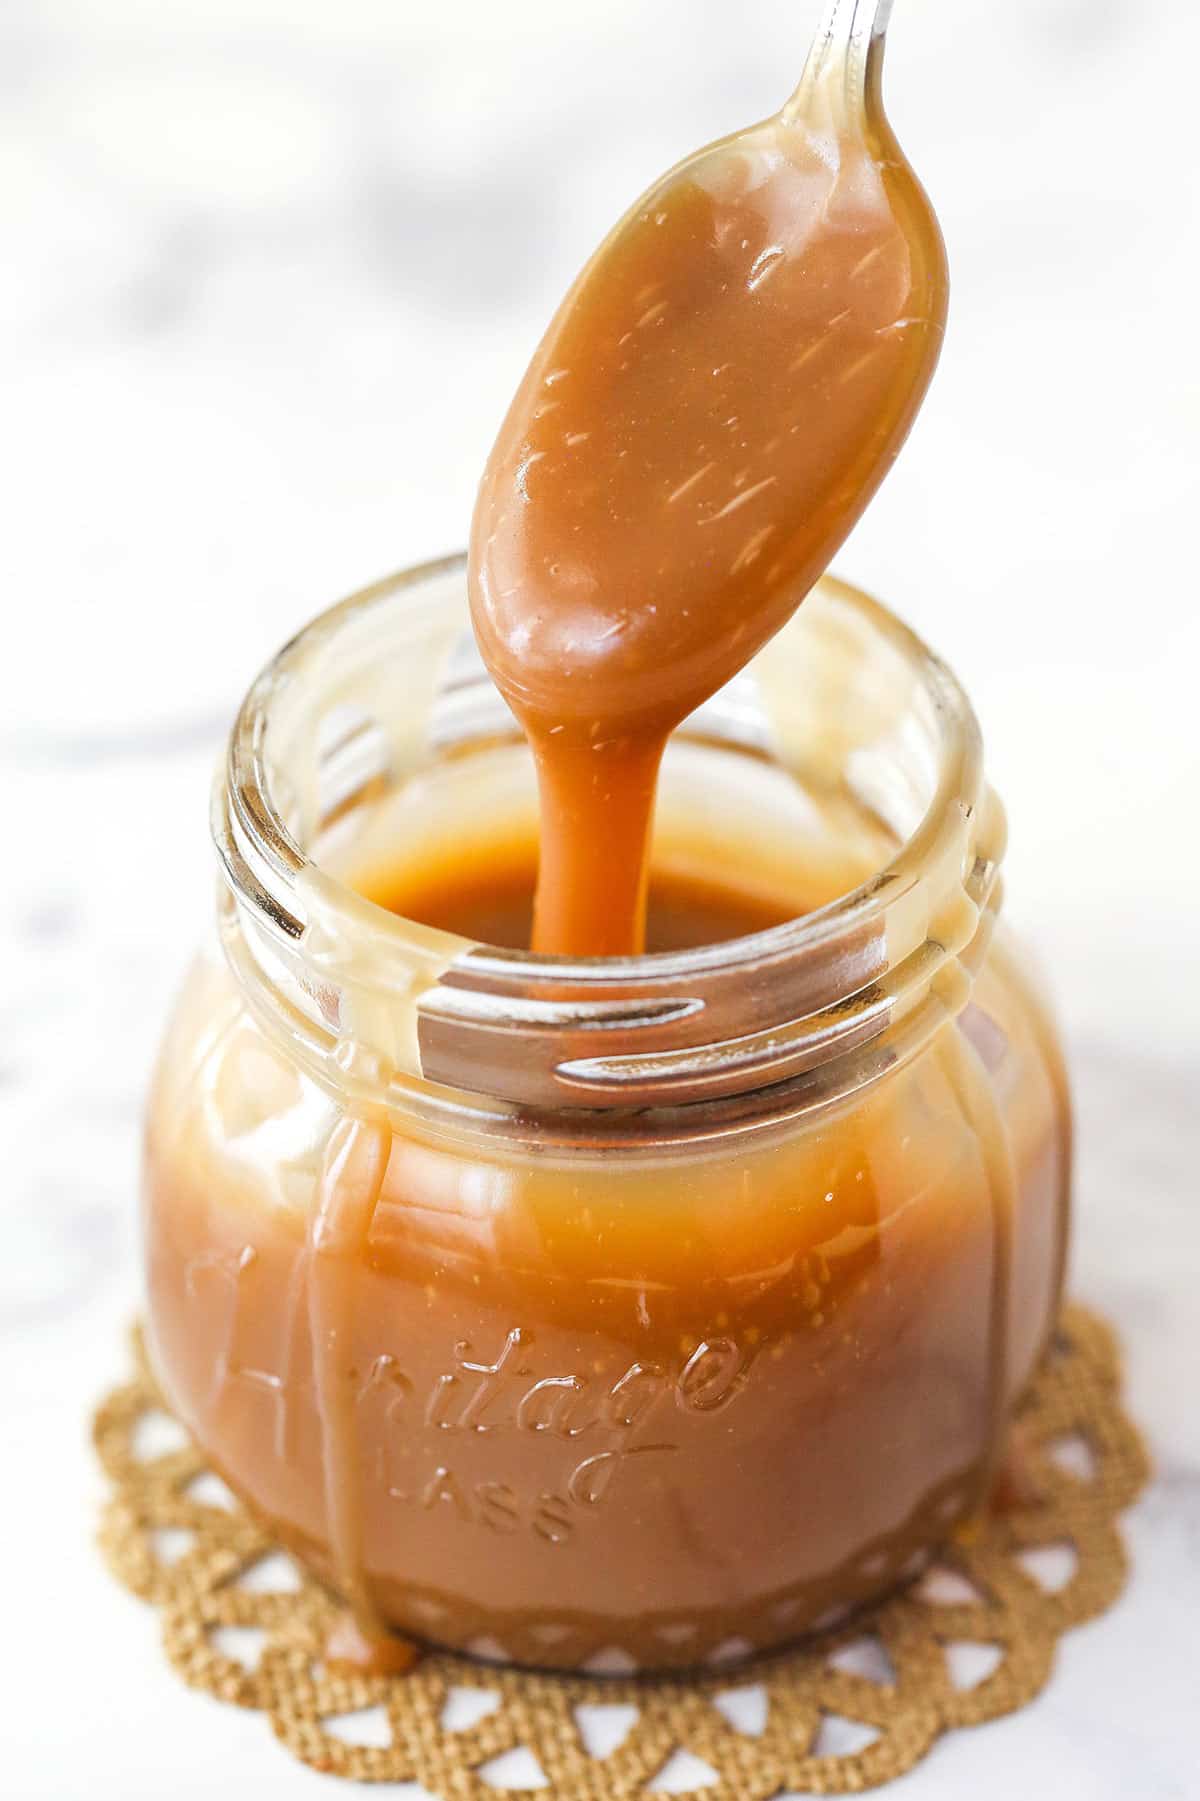 Spoon covered in thick coating of Bourbon Caramel Sauce dripping into a jar.